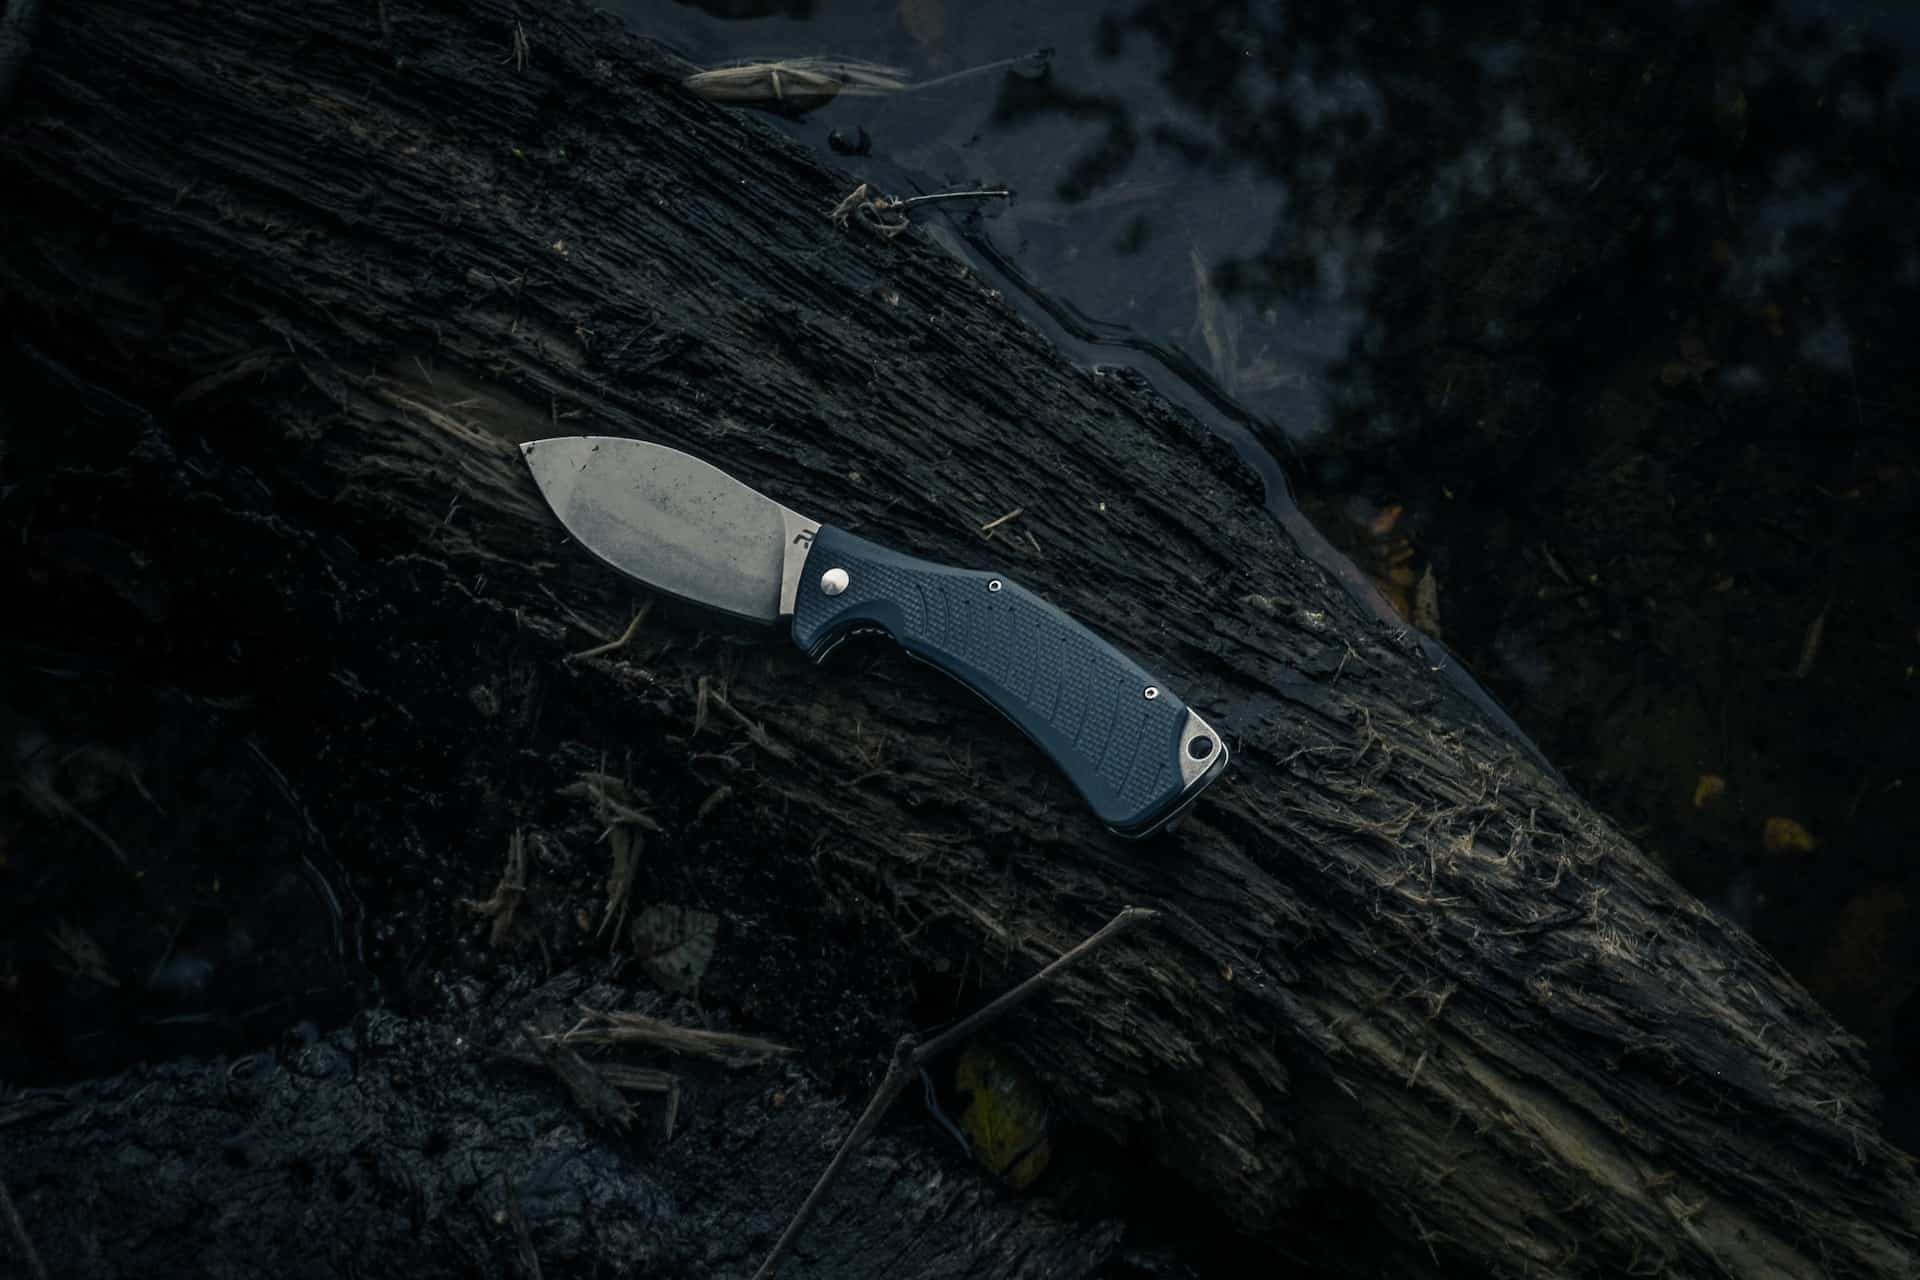 A Stainless Steel Knife is the Best Thing You Can Bring on a Camping Trip